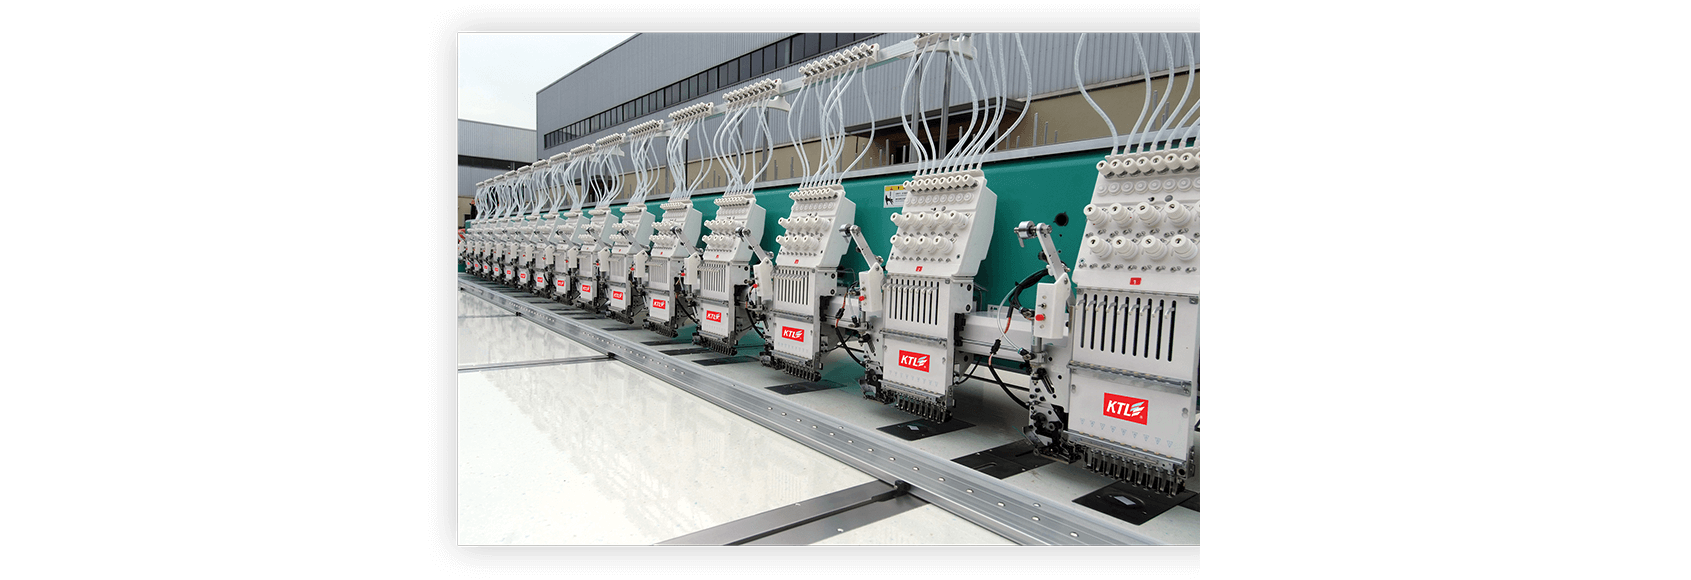 High Speed Embroidery Machine - KTL Textile Machines - Embroidery Machines Supplier in Surat, India